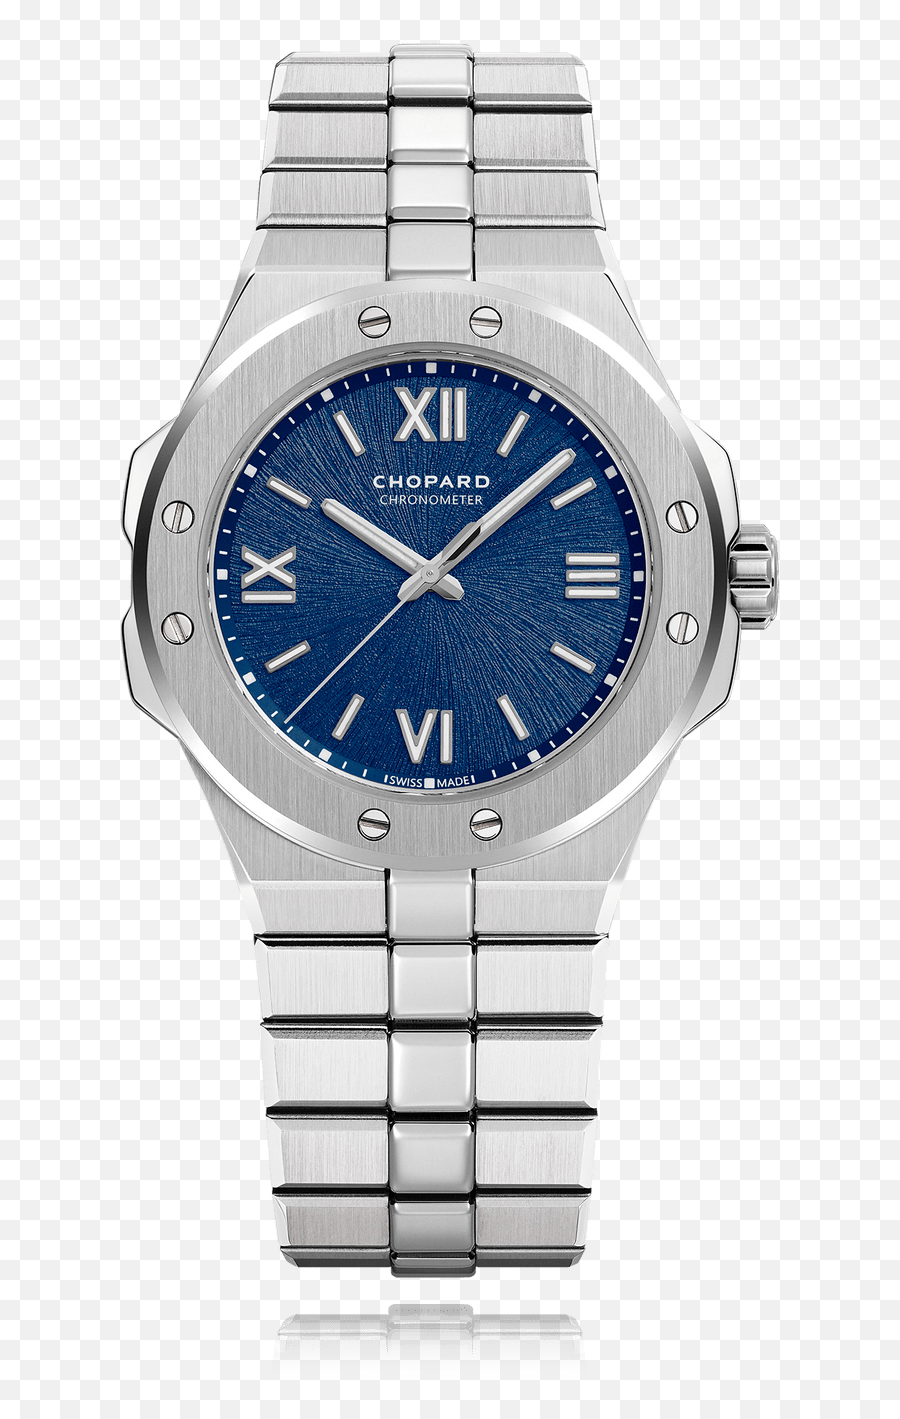 Modern And Confident The Chopard Alpine Eagle Collection - Chopard Blue Dial Diamond Watch Png,White Watch Icon